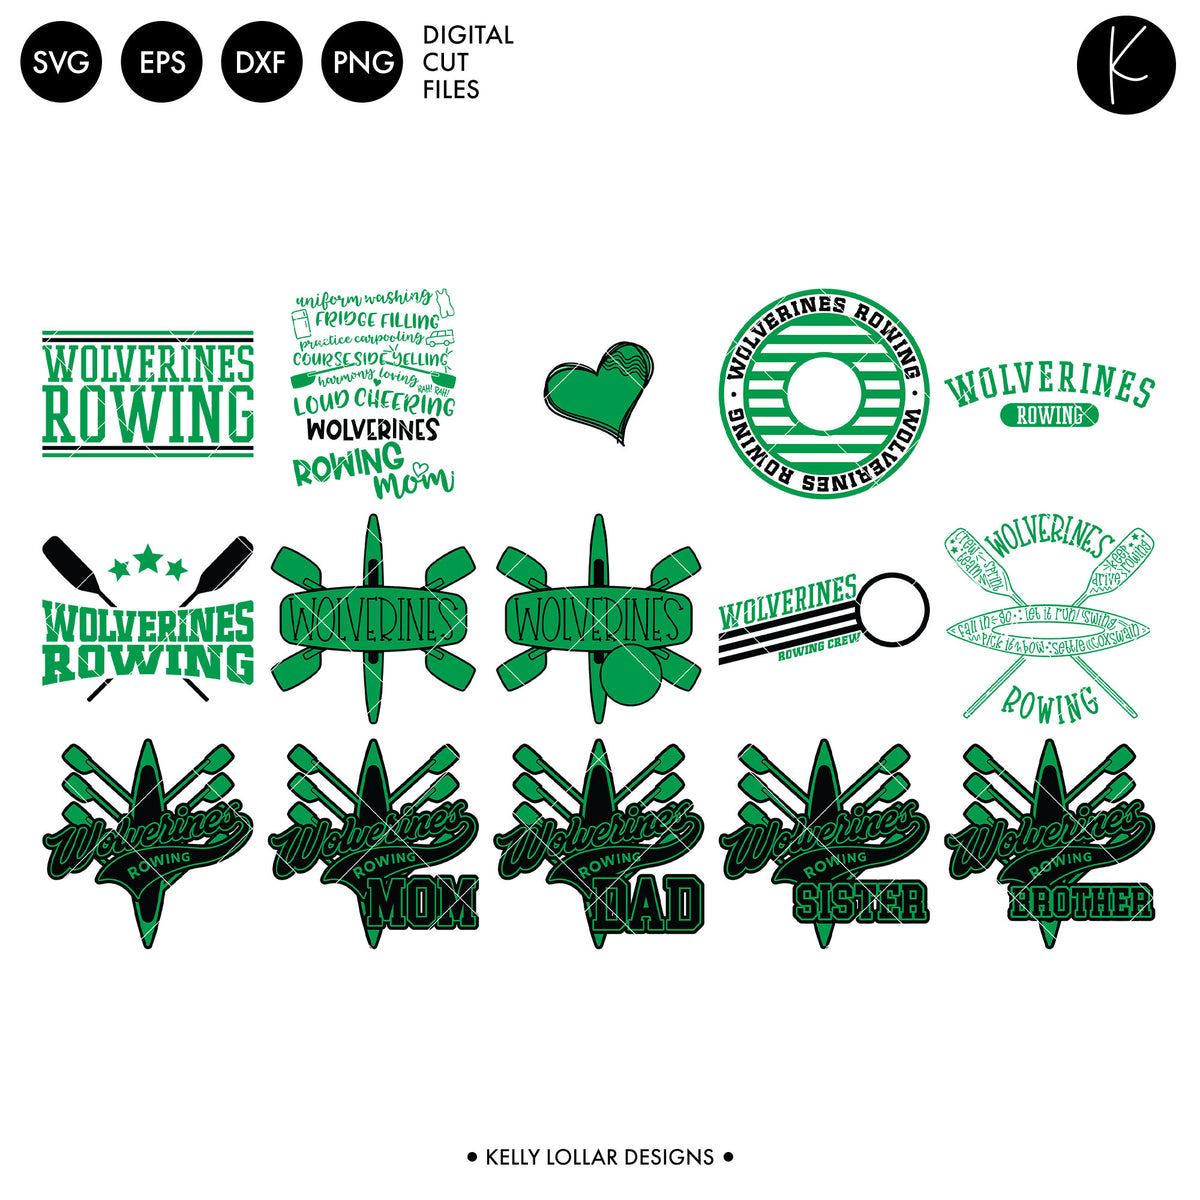 Wolverines Rowing Crew Bundle | SVG DXF EPS PNG Cut Files